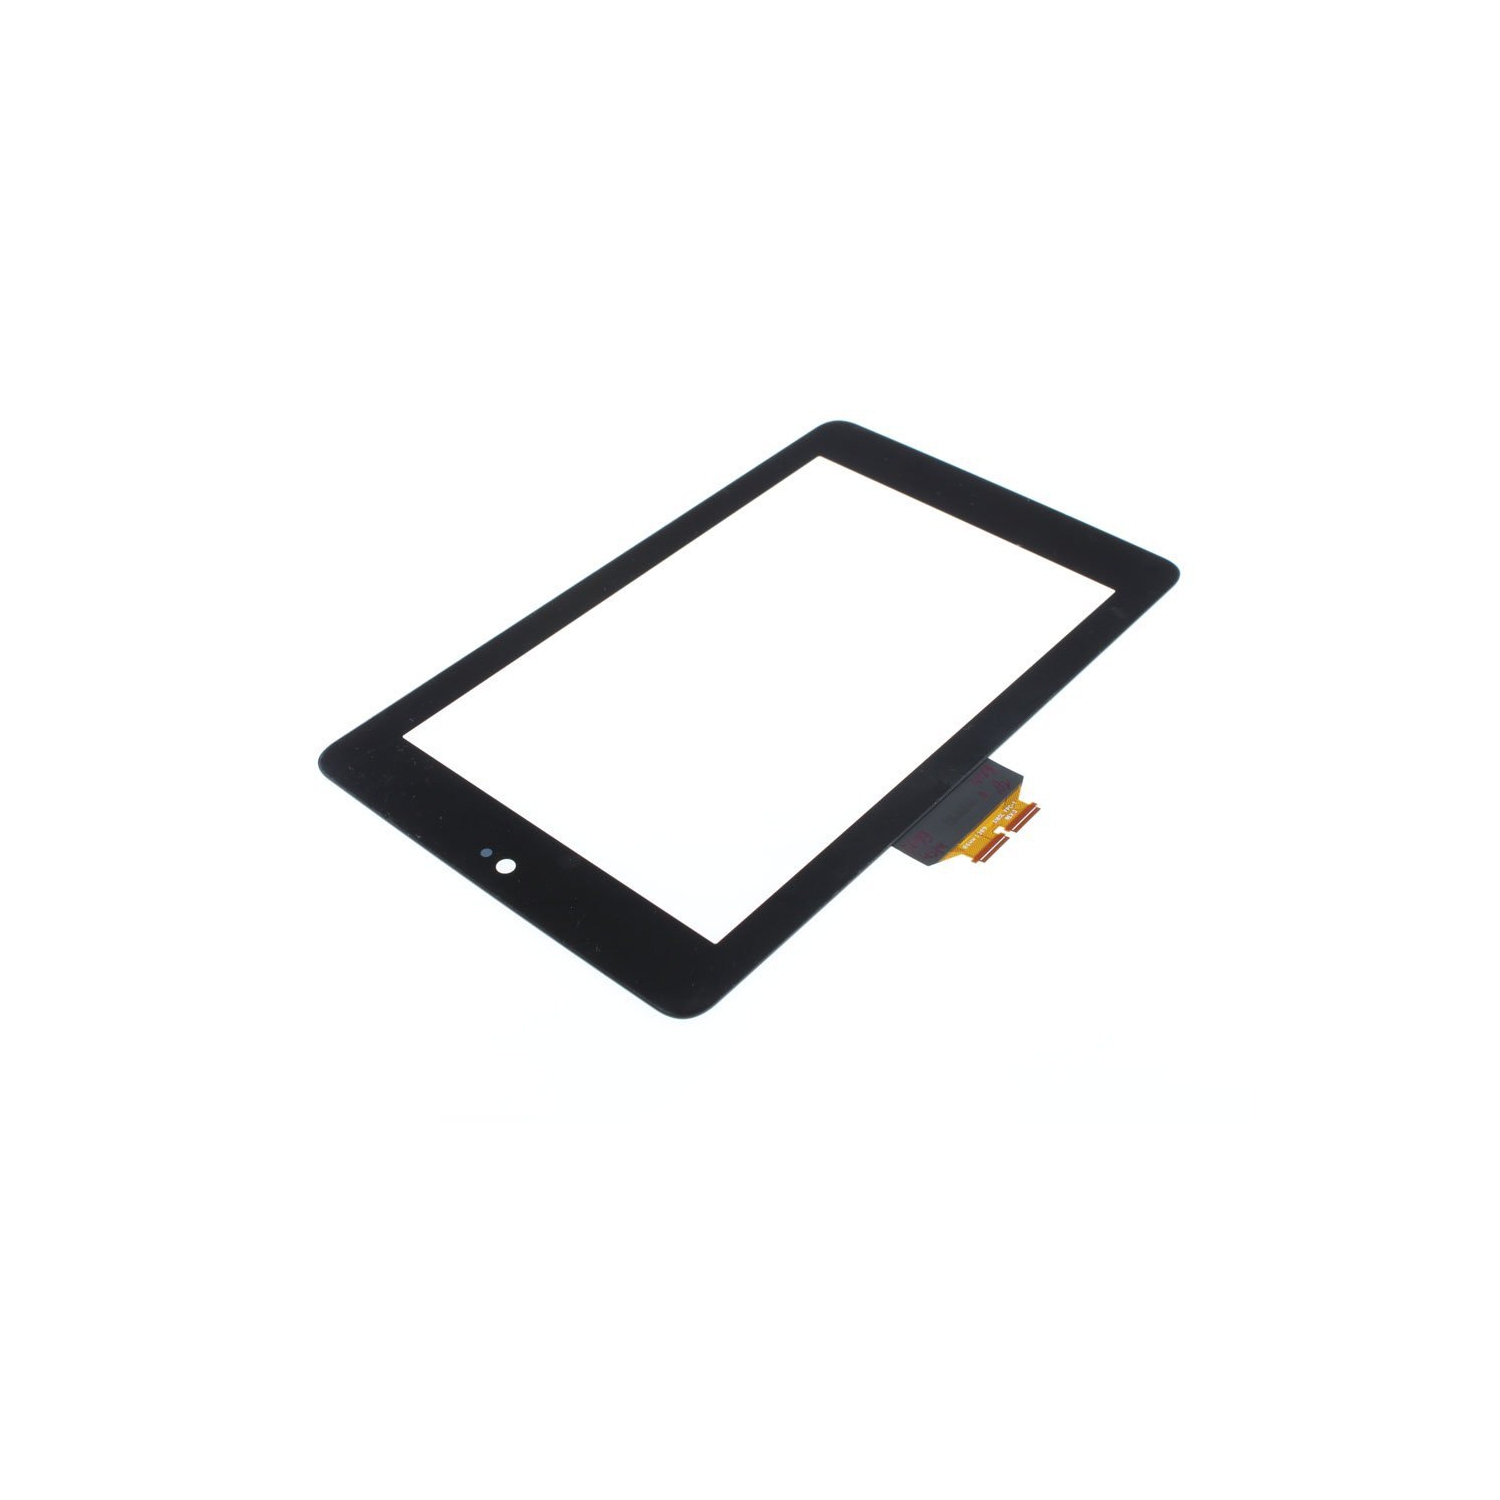 Asus Google Nexus 7 Tablet Digitizer Touch Screen 1st Generation Replacement